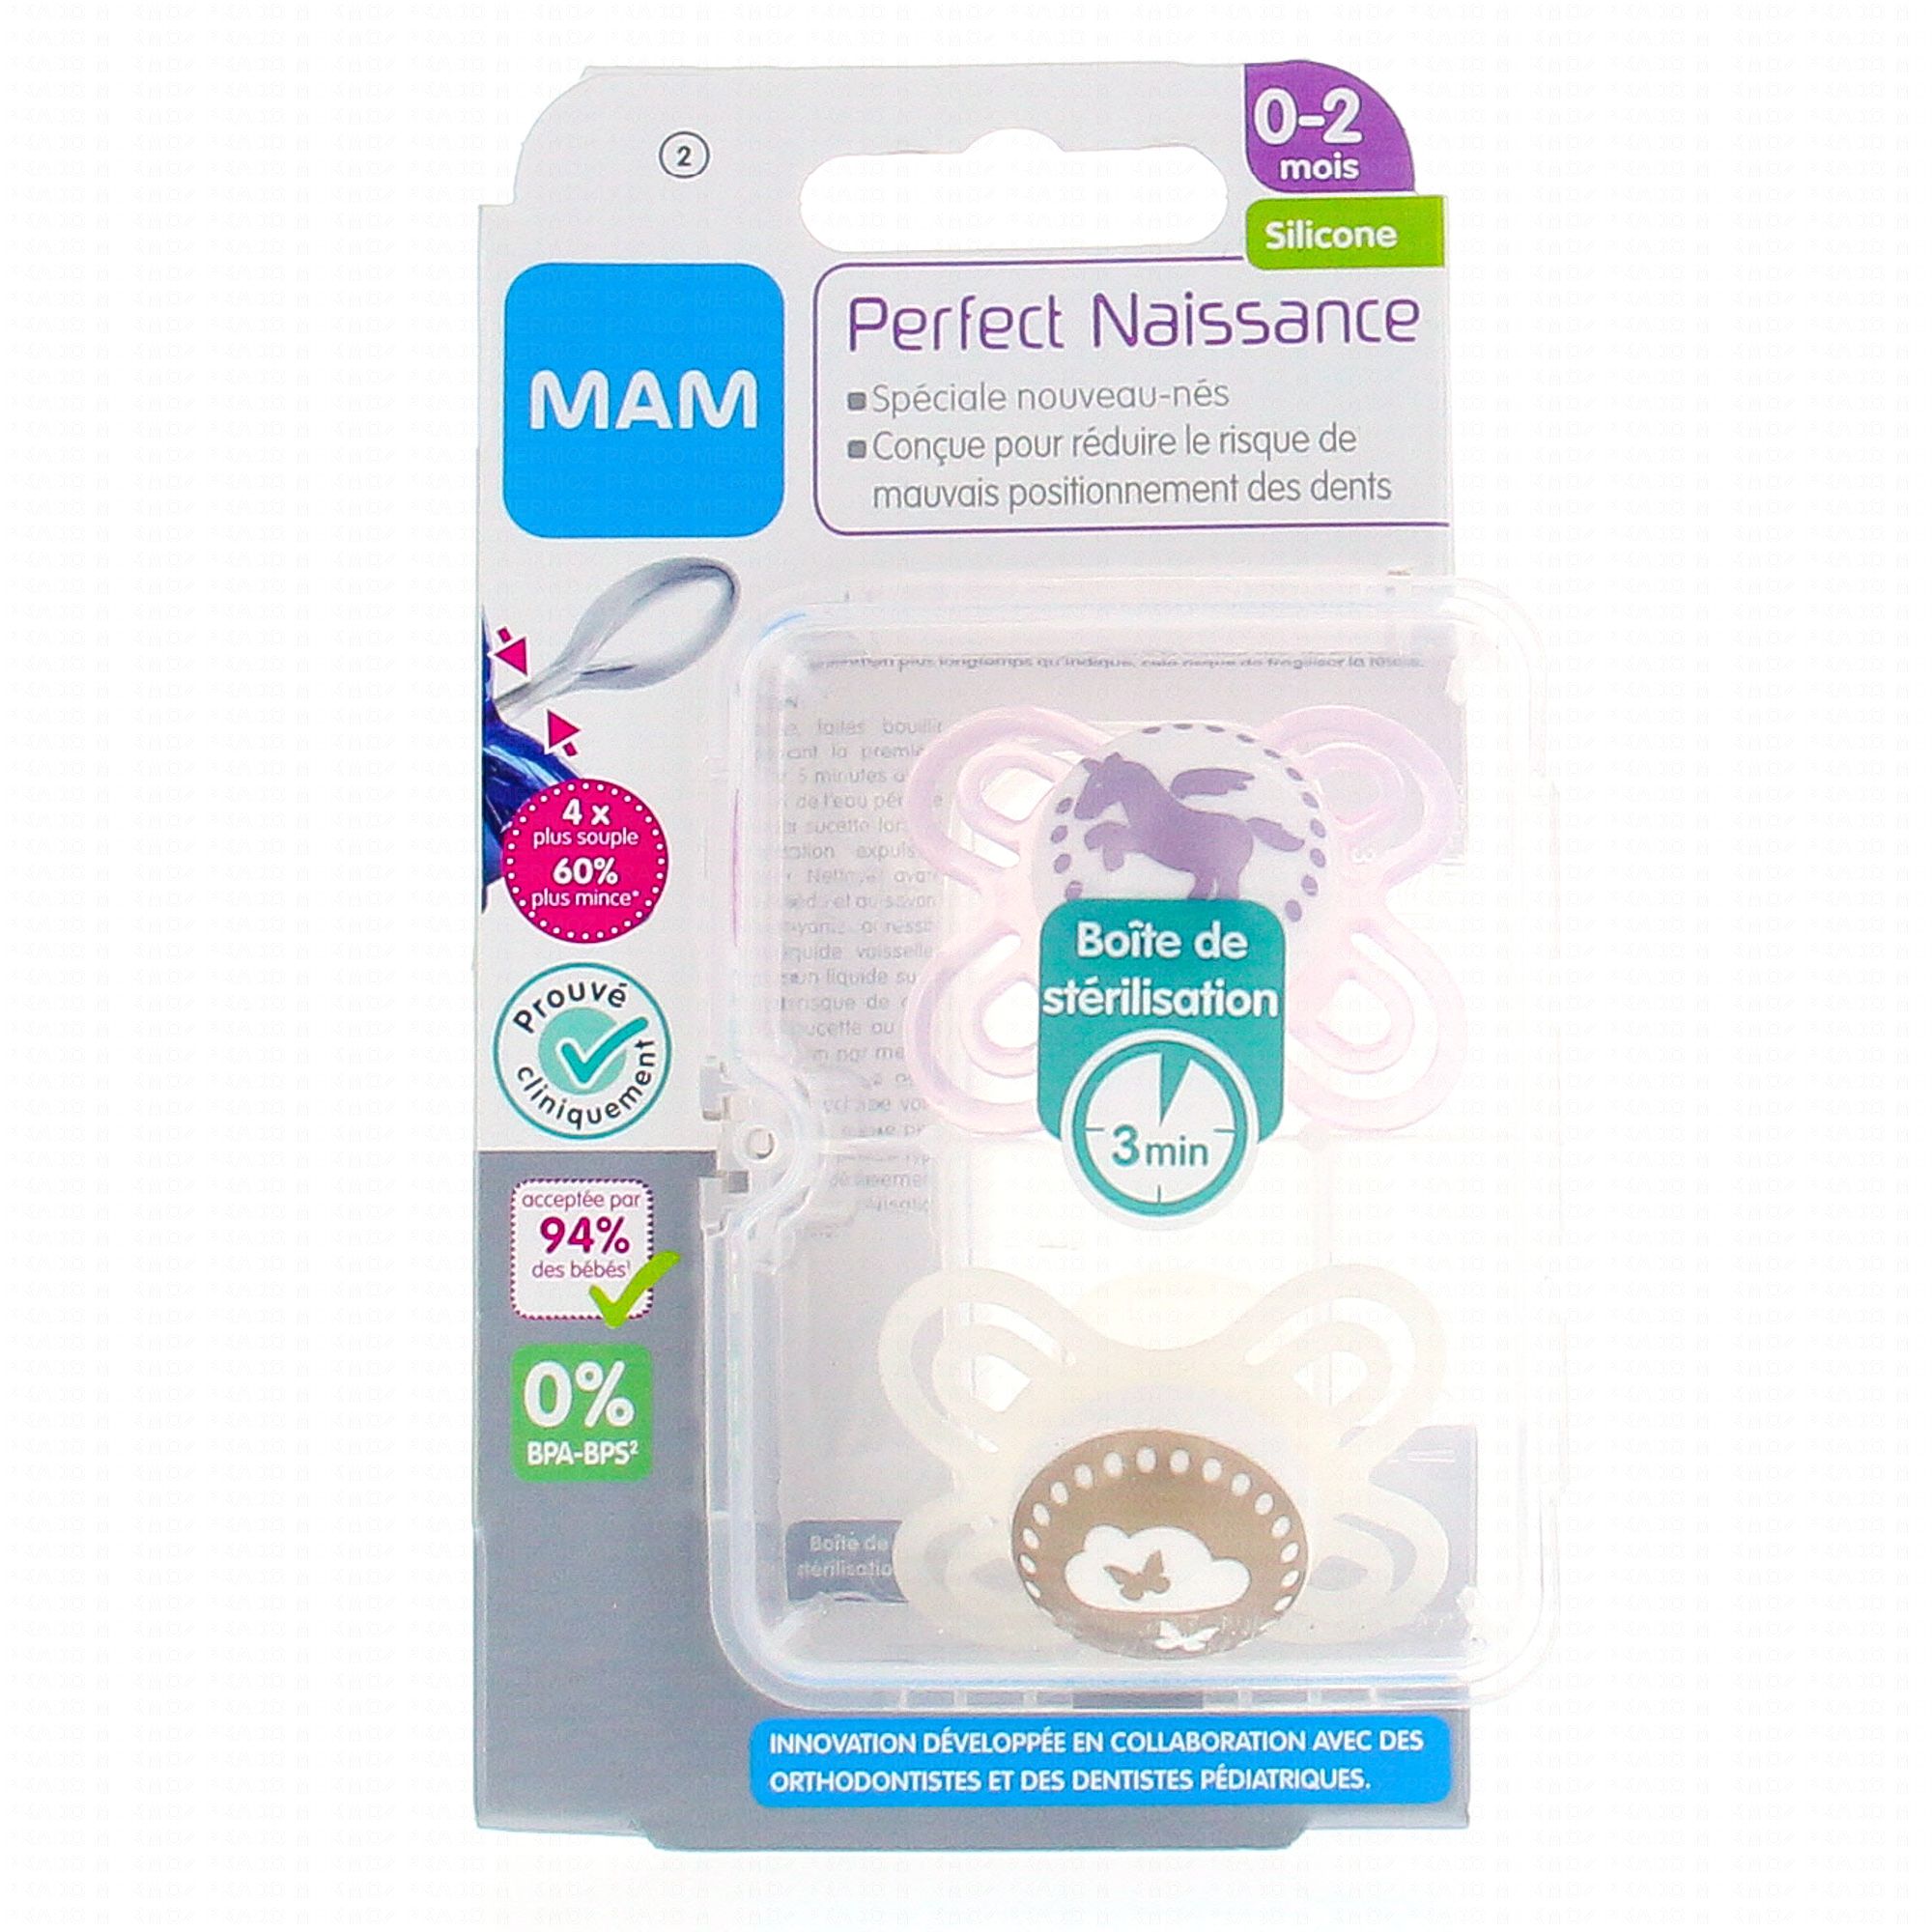 PHARMACIE CENTRE COMMERCIAL ITALIE 2 - MAM 2 SUCETTES PERFECT NAISSANCE  ROSE 0-2 MOIS